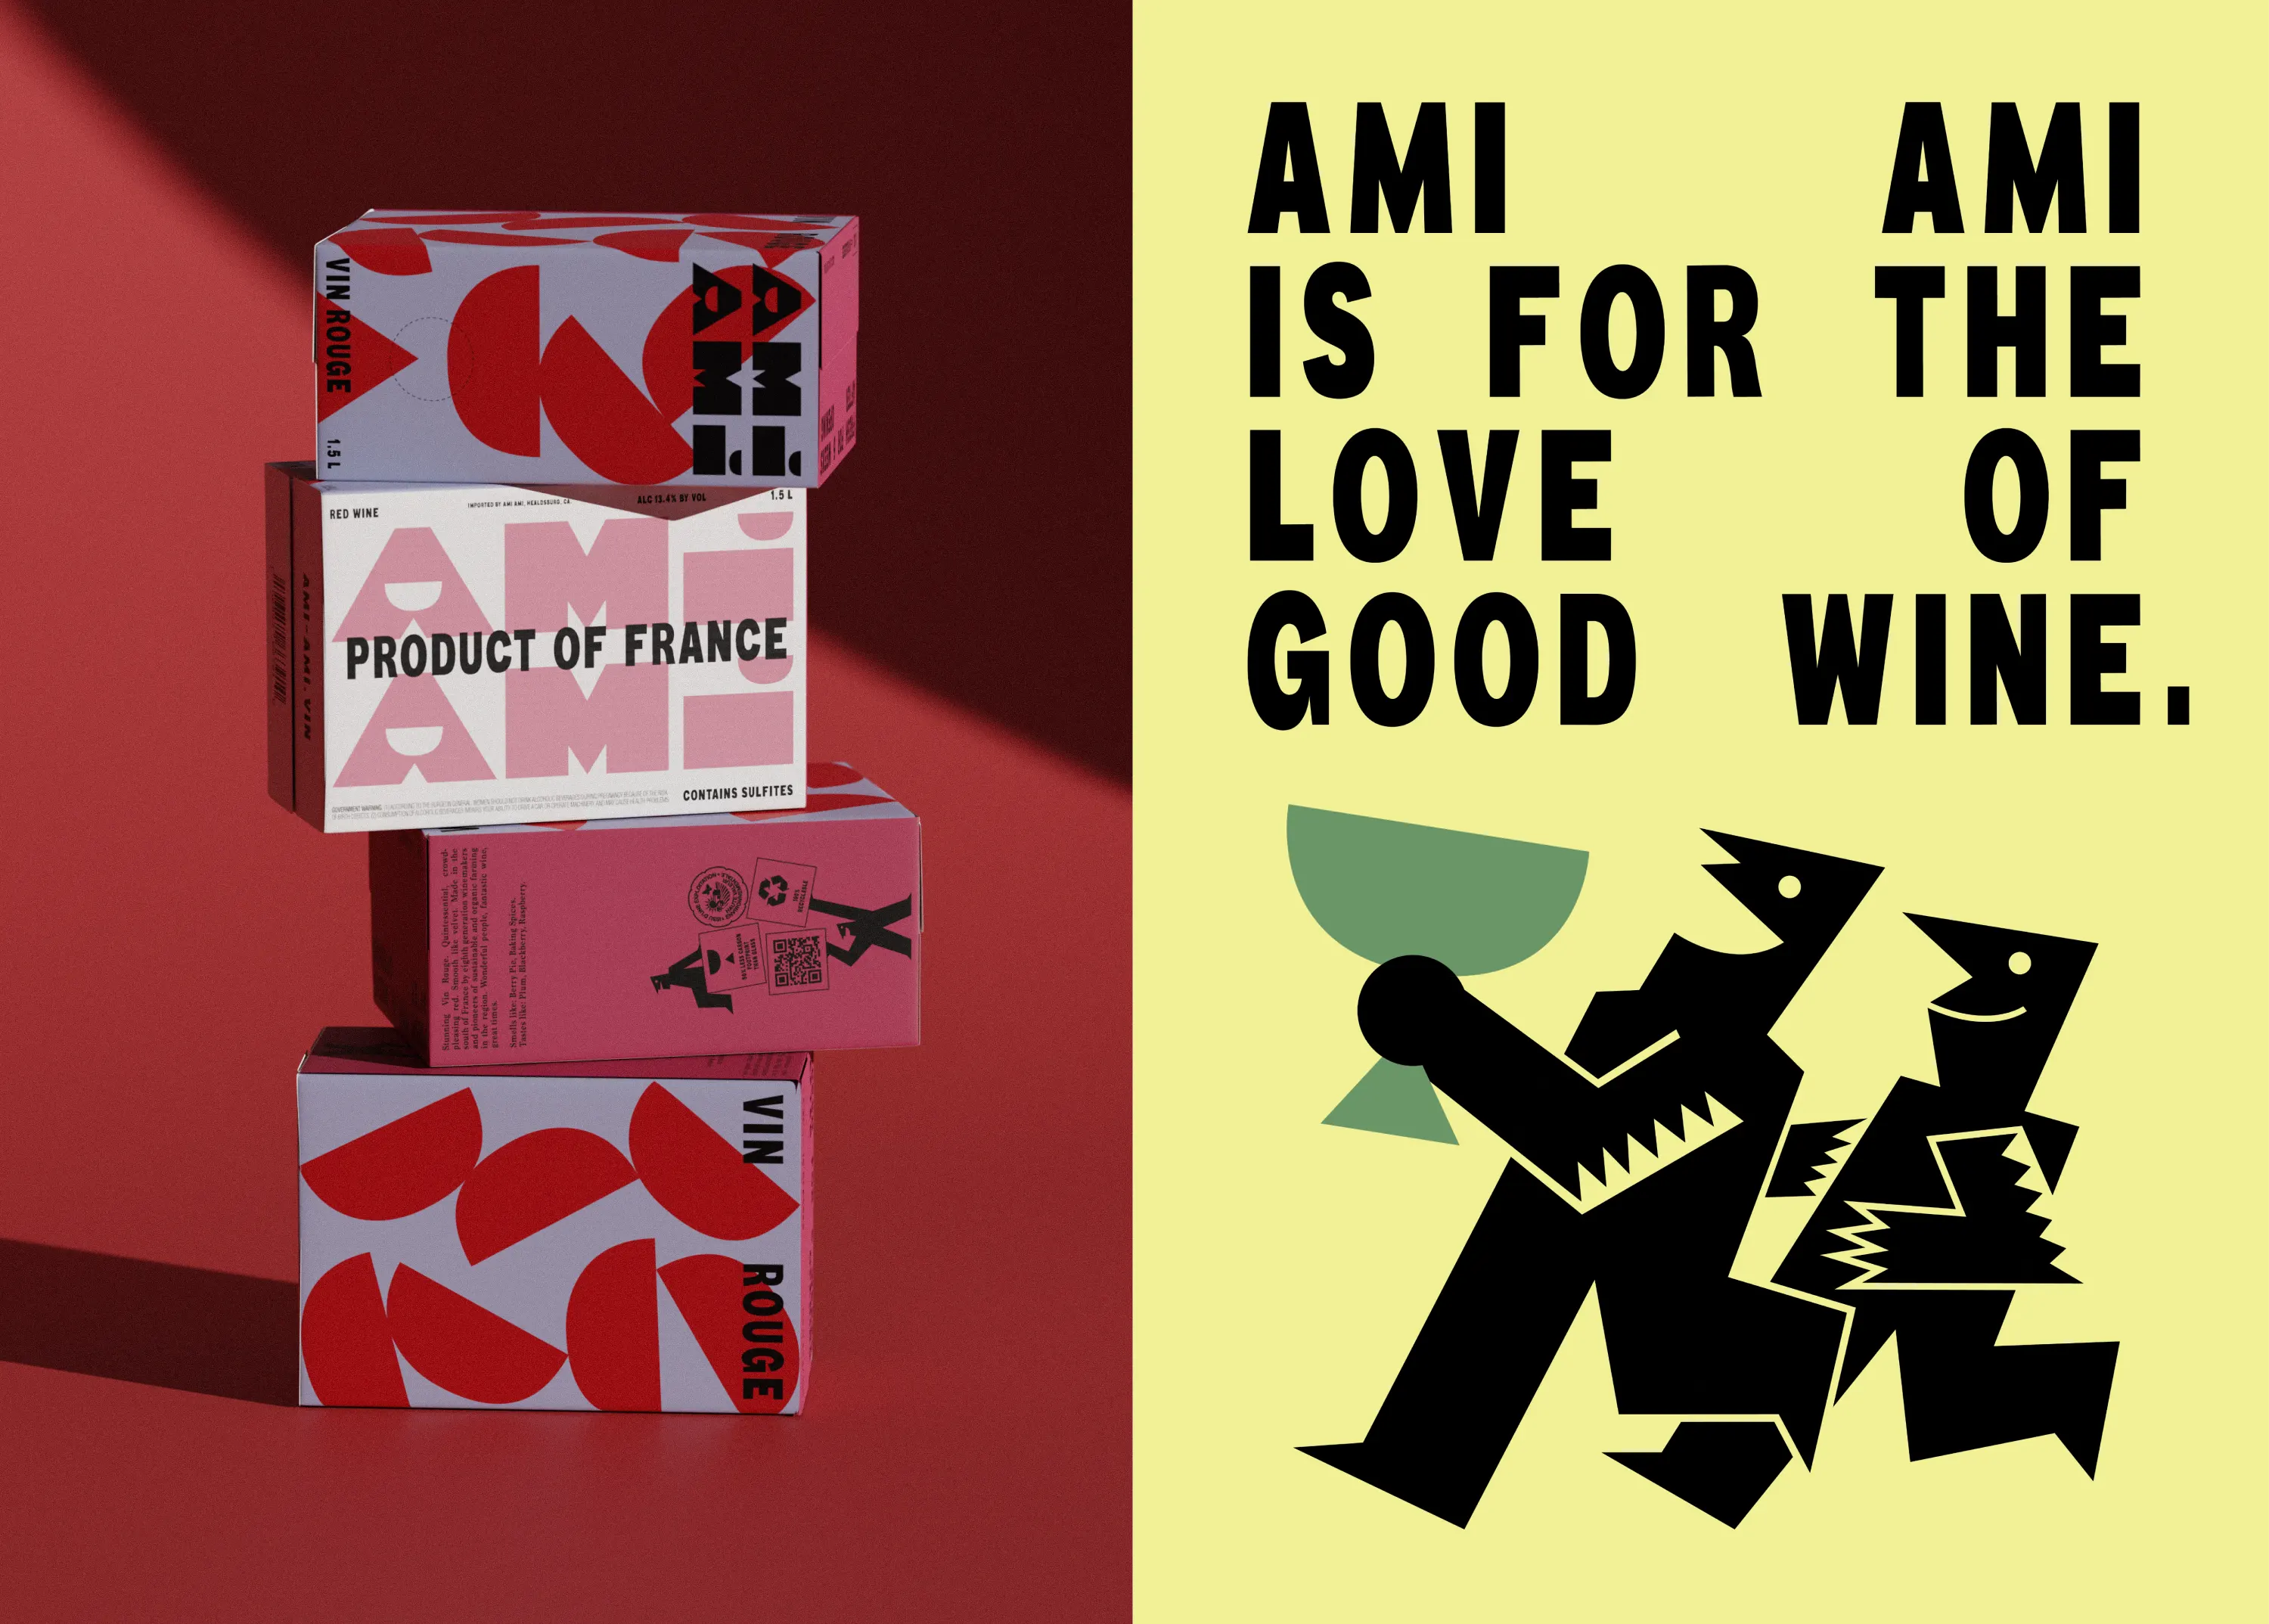 63ee9a08c815067627b3fe8b_wedge-ami-ami-for-the-love-of-wine.png